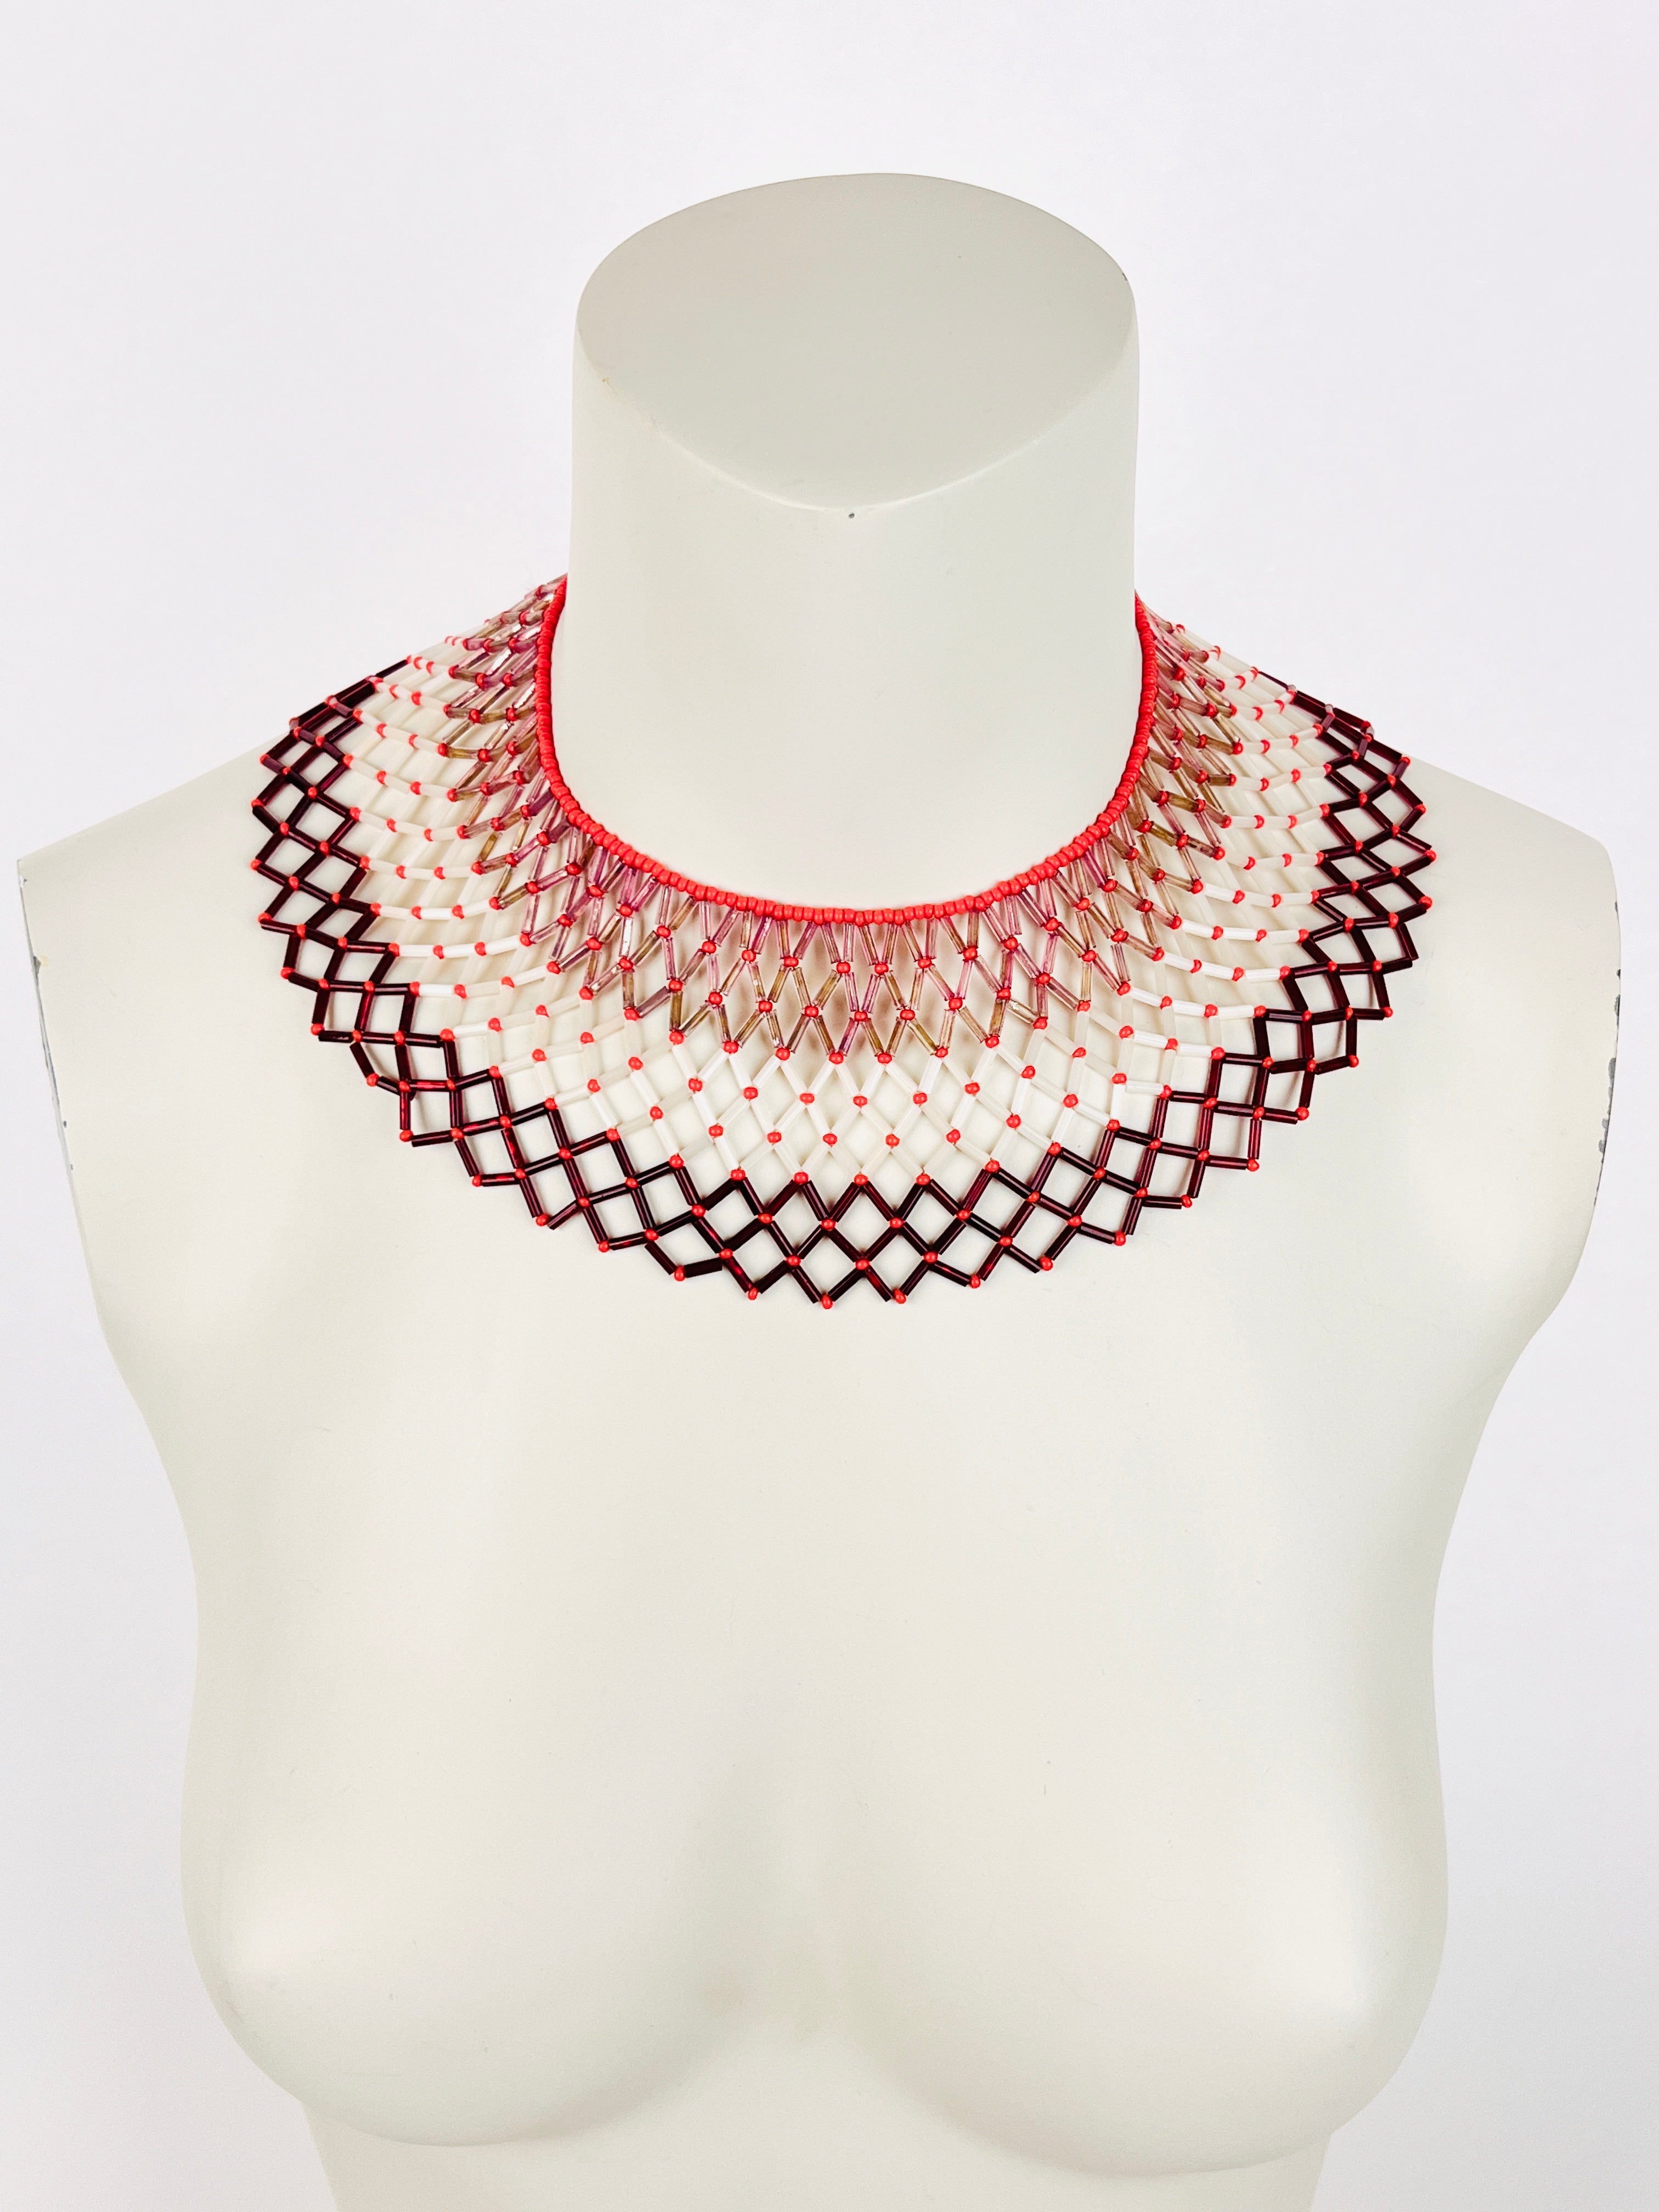 Beaded collar necklace tutorial for beginners - YouTube